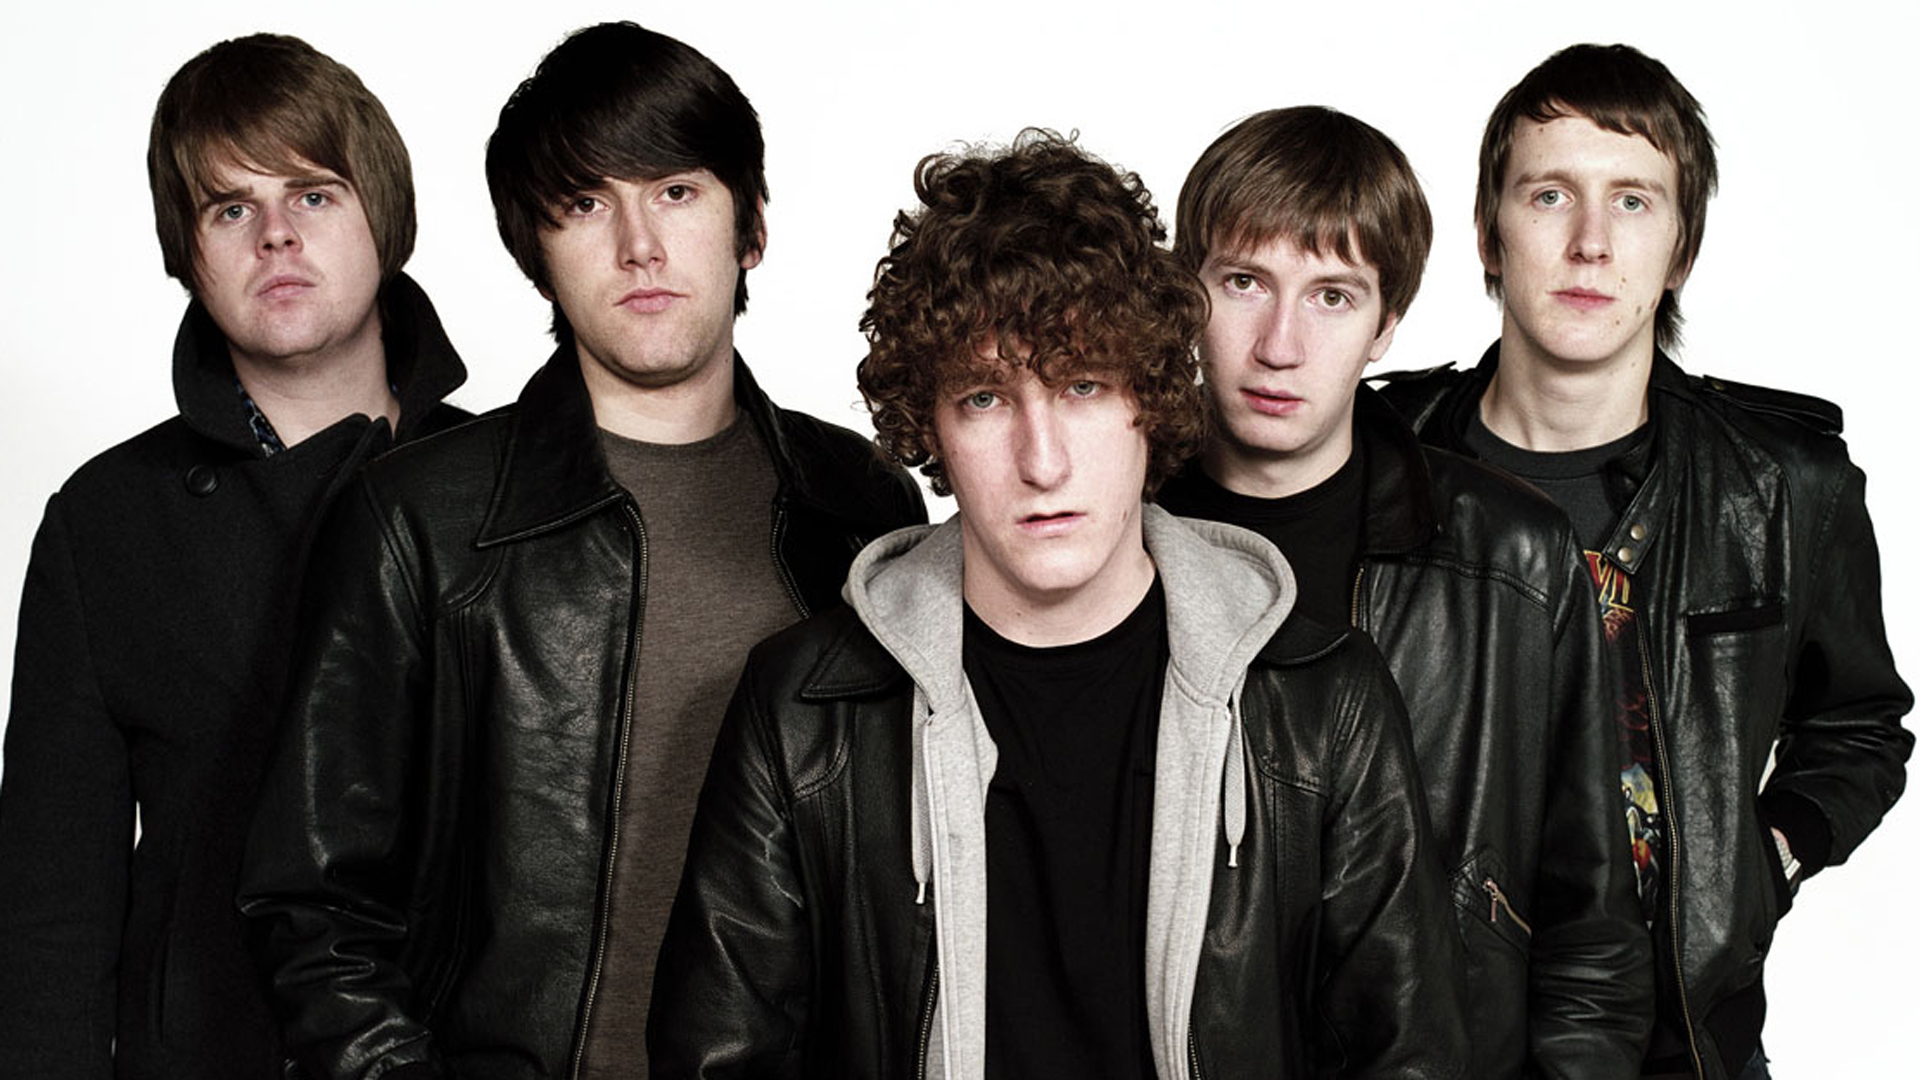 Caught In Your Trap Uf av The Pigeon Detectives